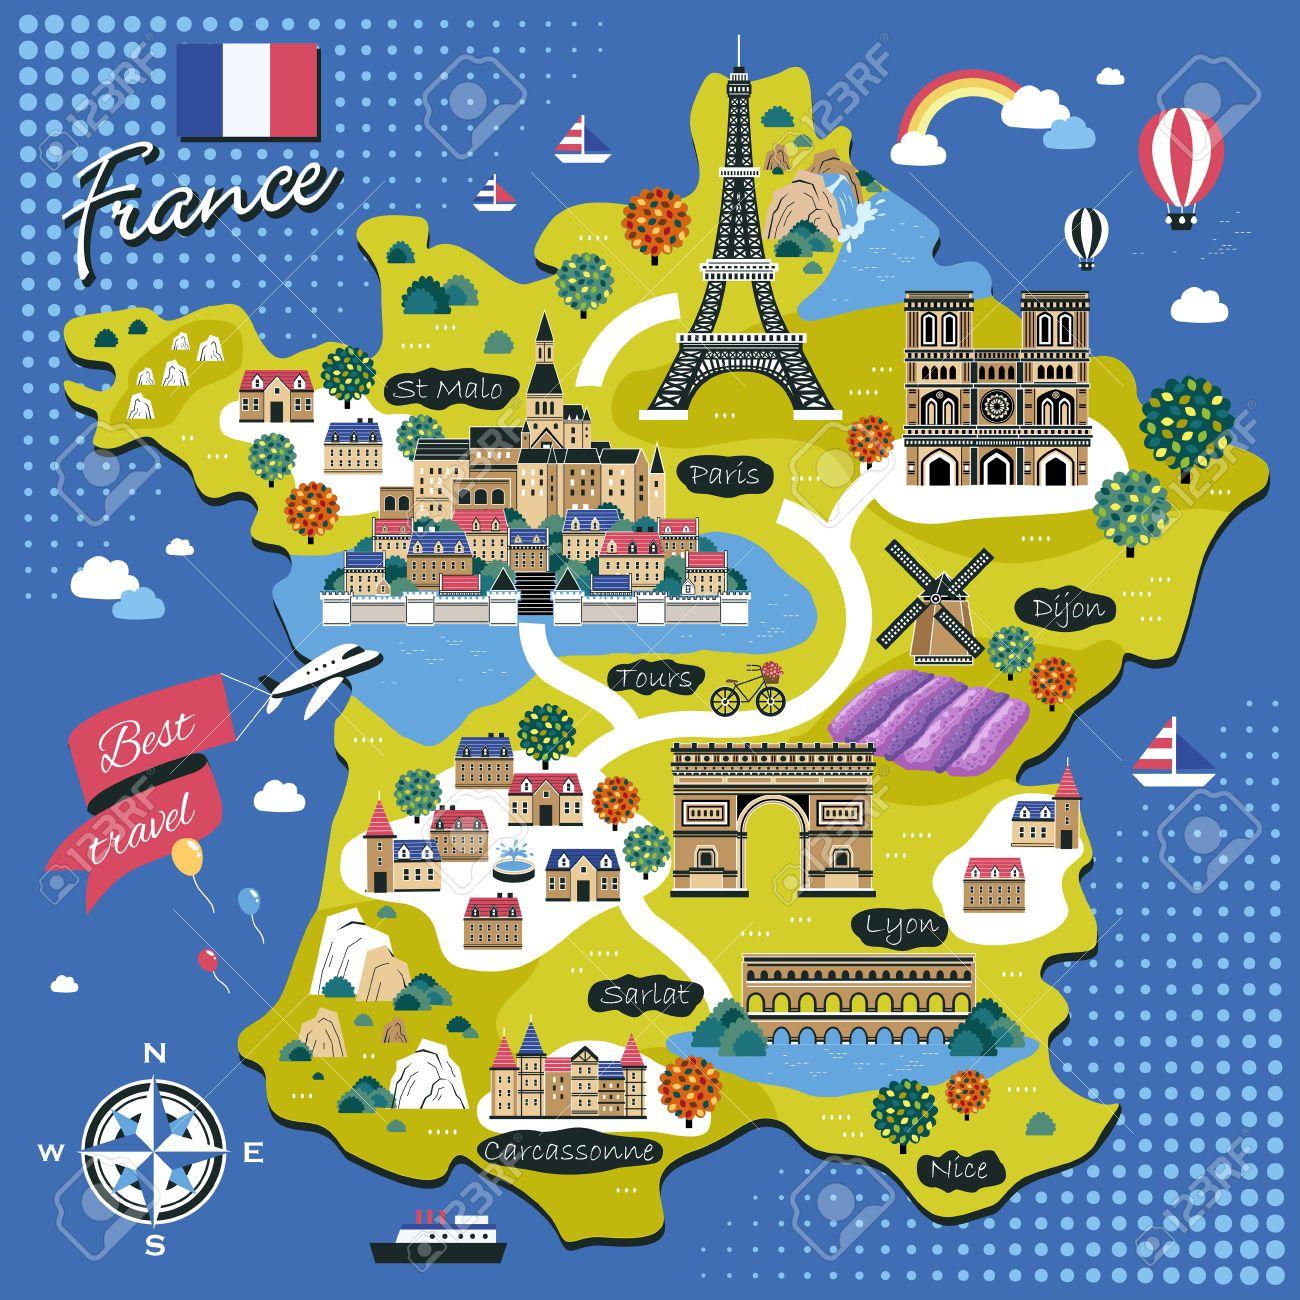 France Attractions Map 